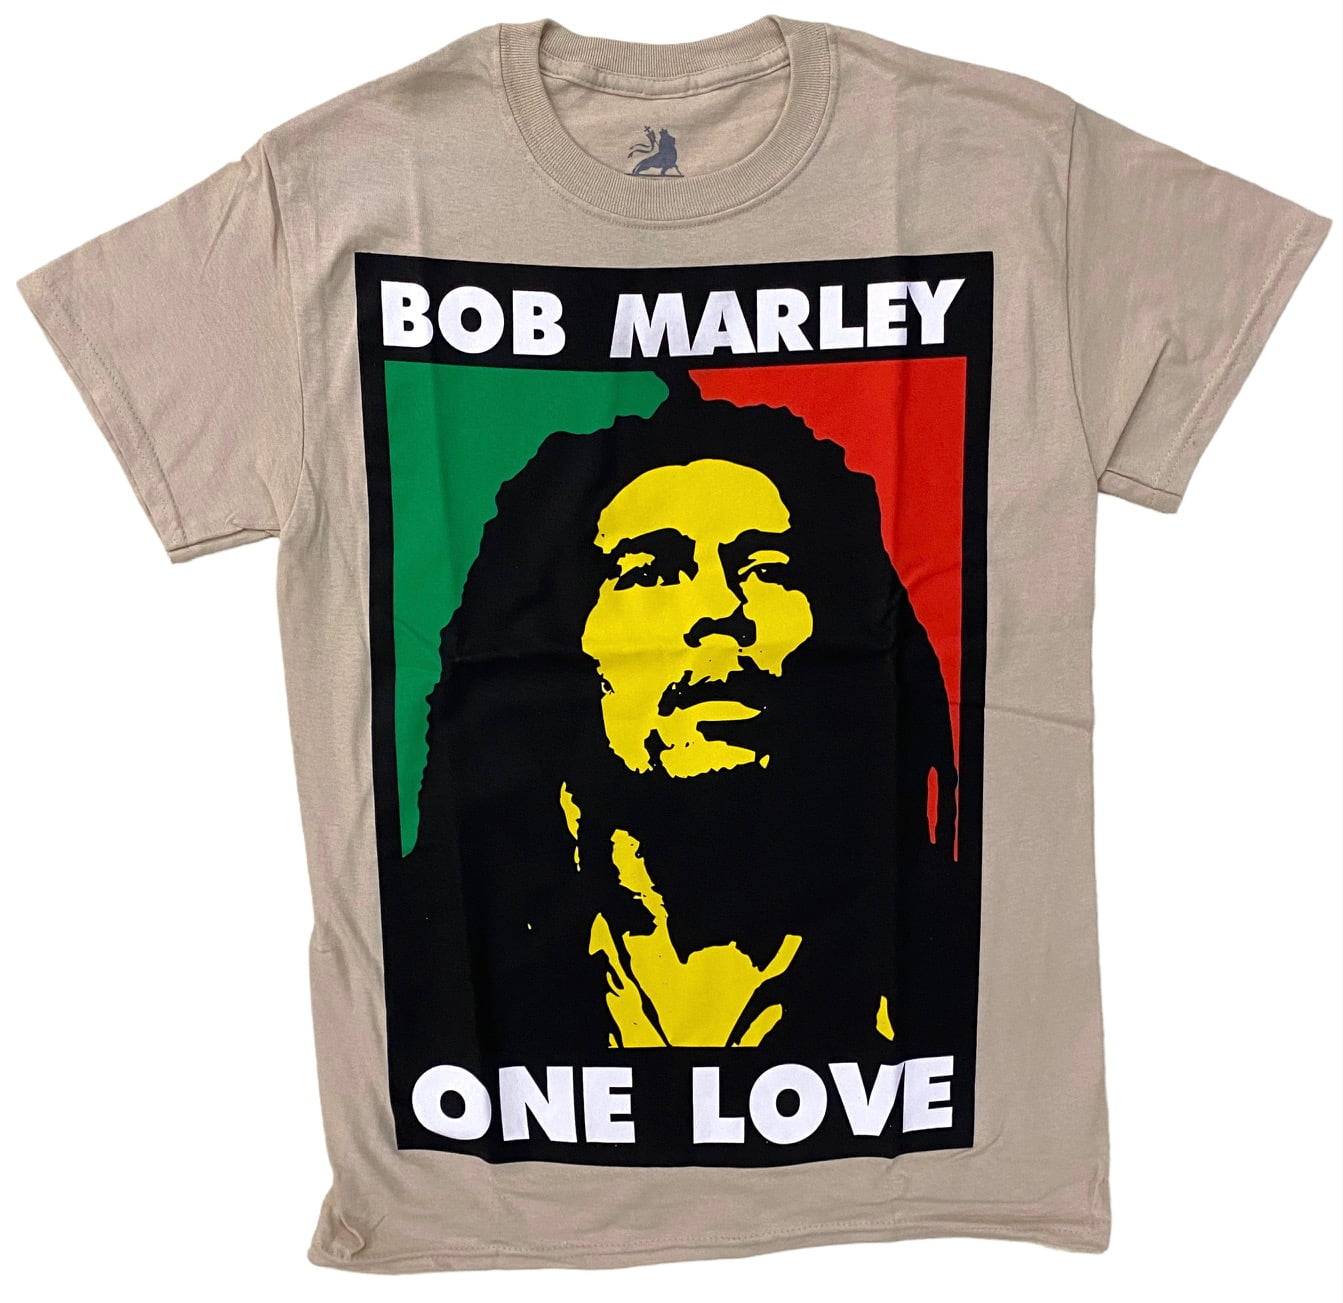 Citron Zoologisk have burst Bob Marley Men's Officially Licensed Graphic Print Retro Vintage Tee T-Shirt  (Small, Tan One Love) - Walmart.com